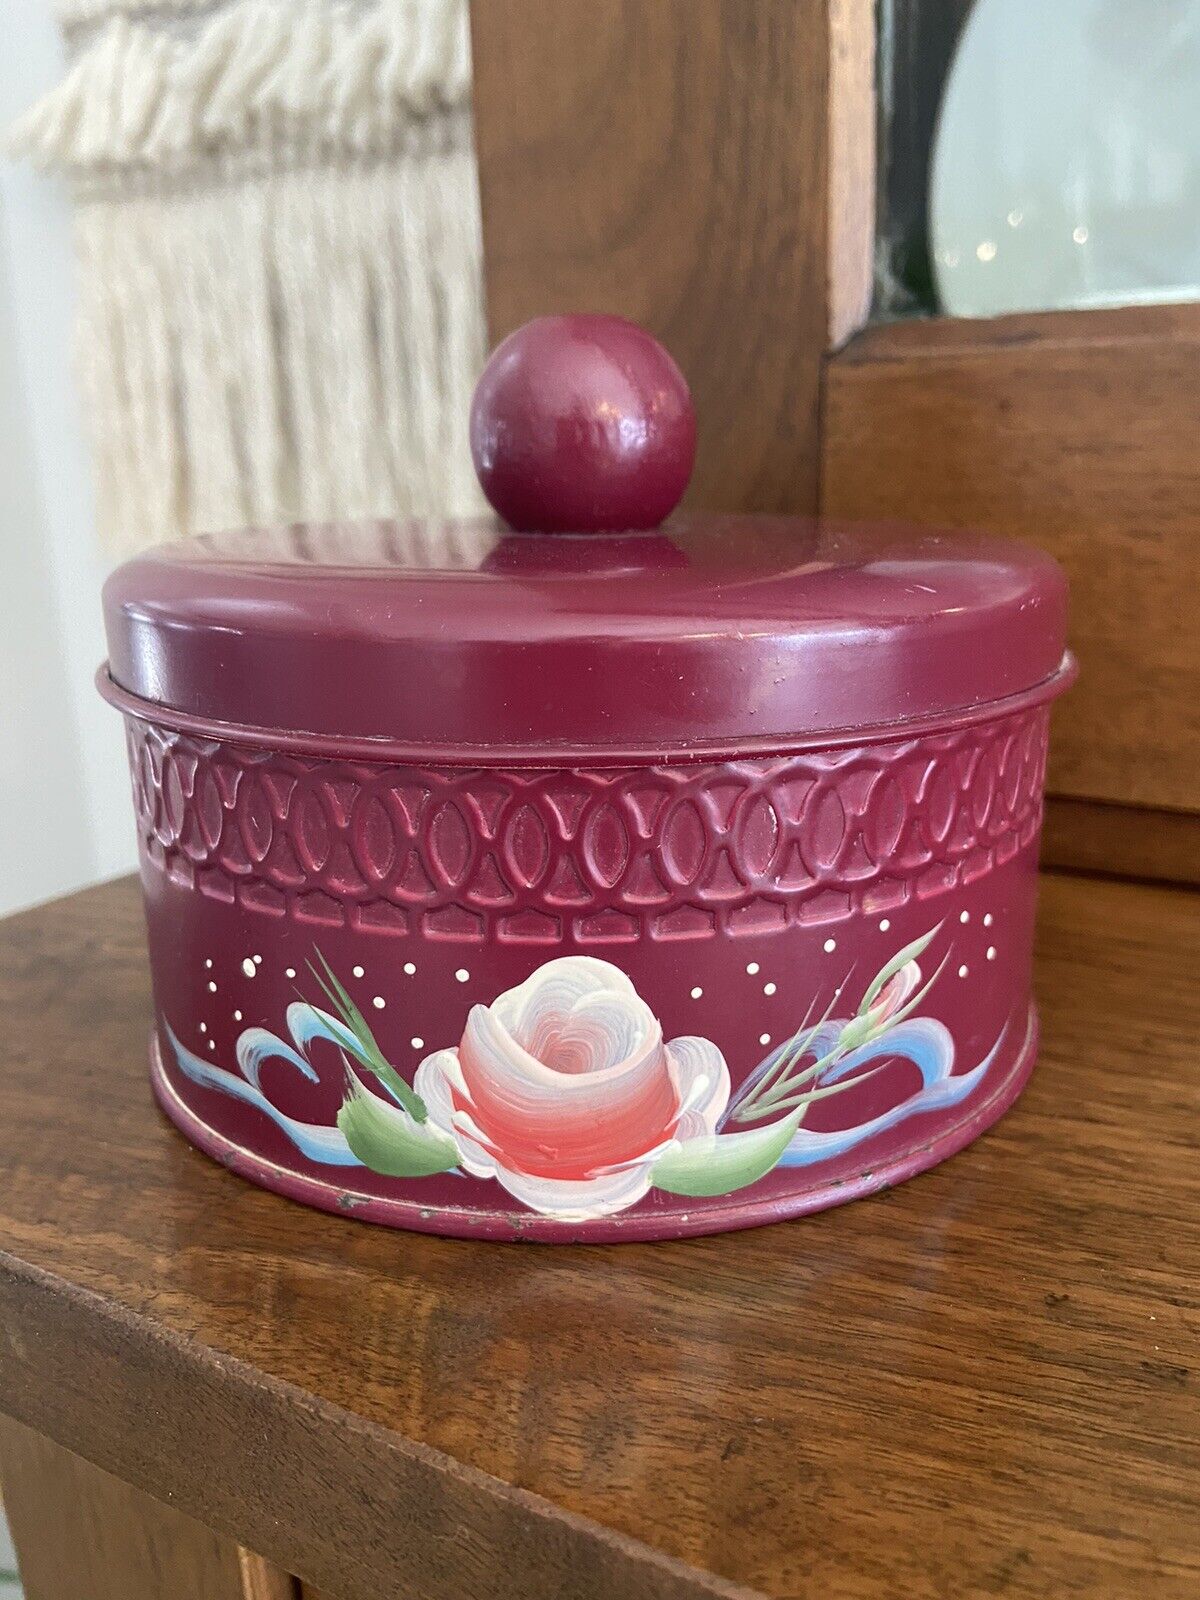 Vintage Talc Powder Tin With Wooden Knob Plum/Red Color With Flowers